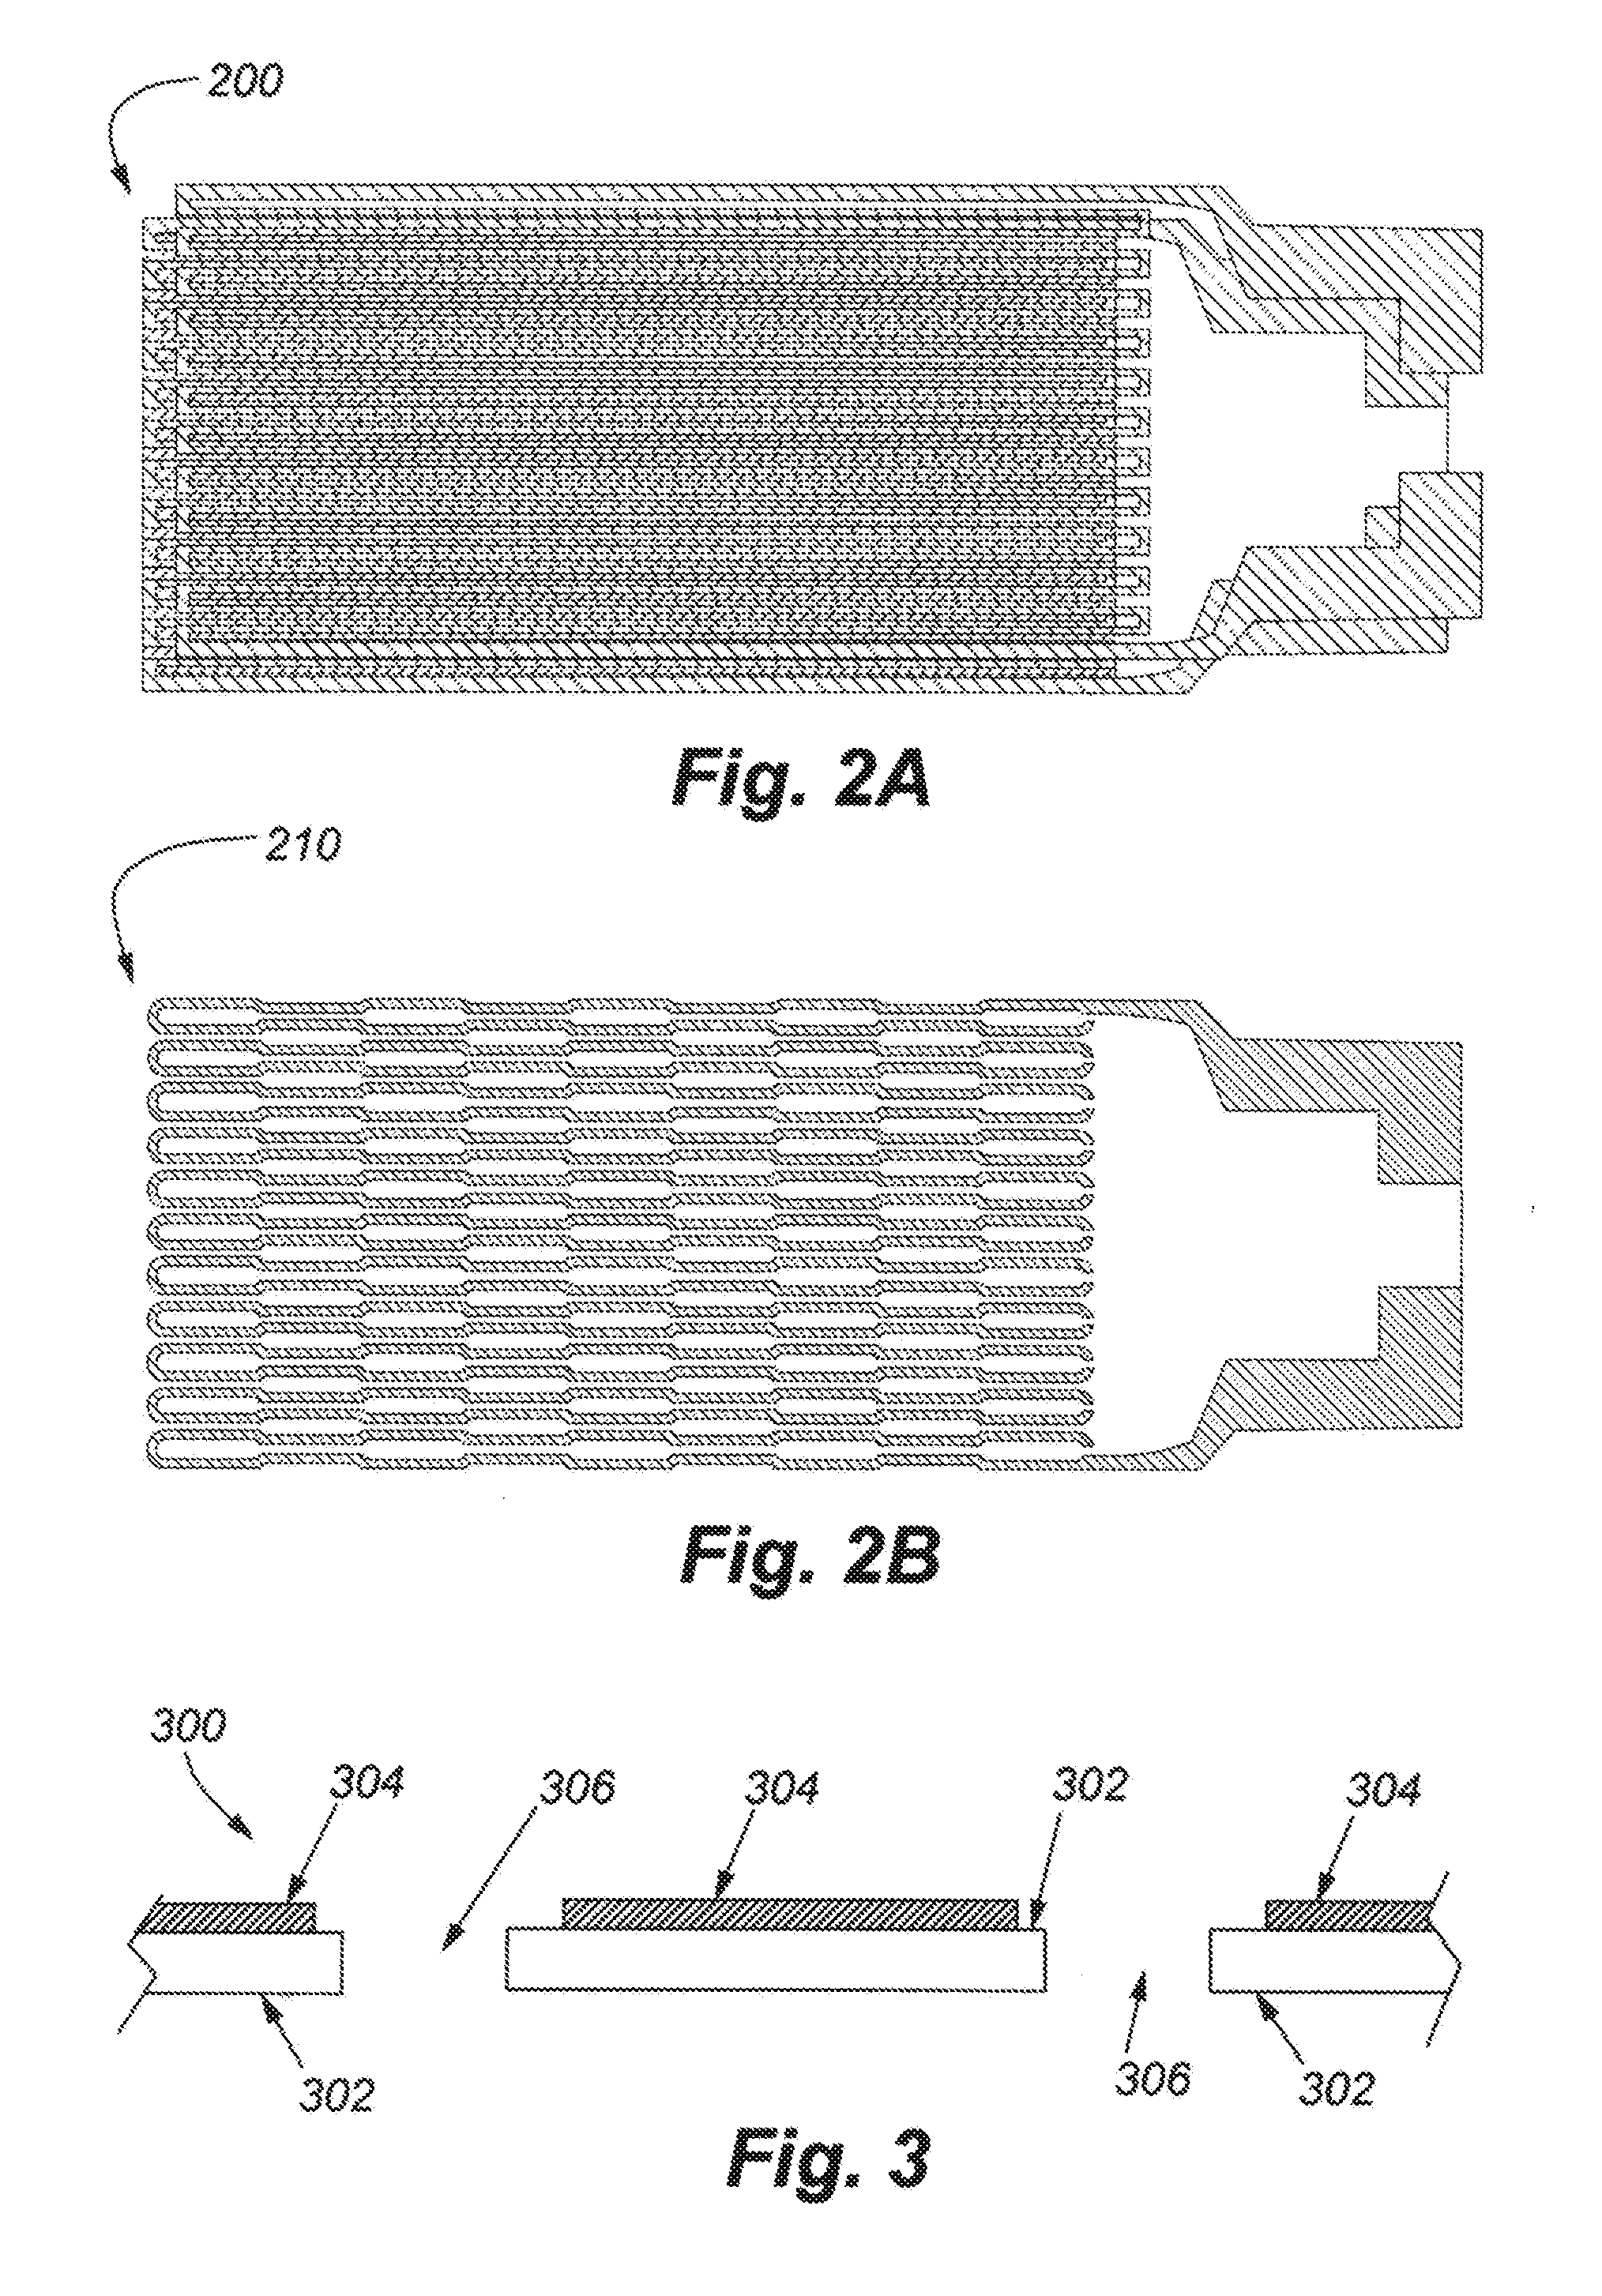 Heating unit for use in a drug delivery device